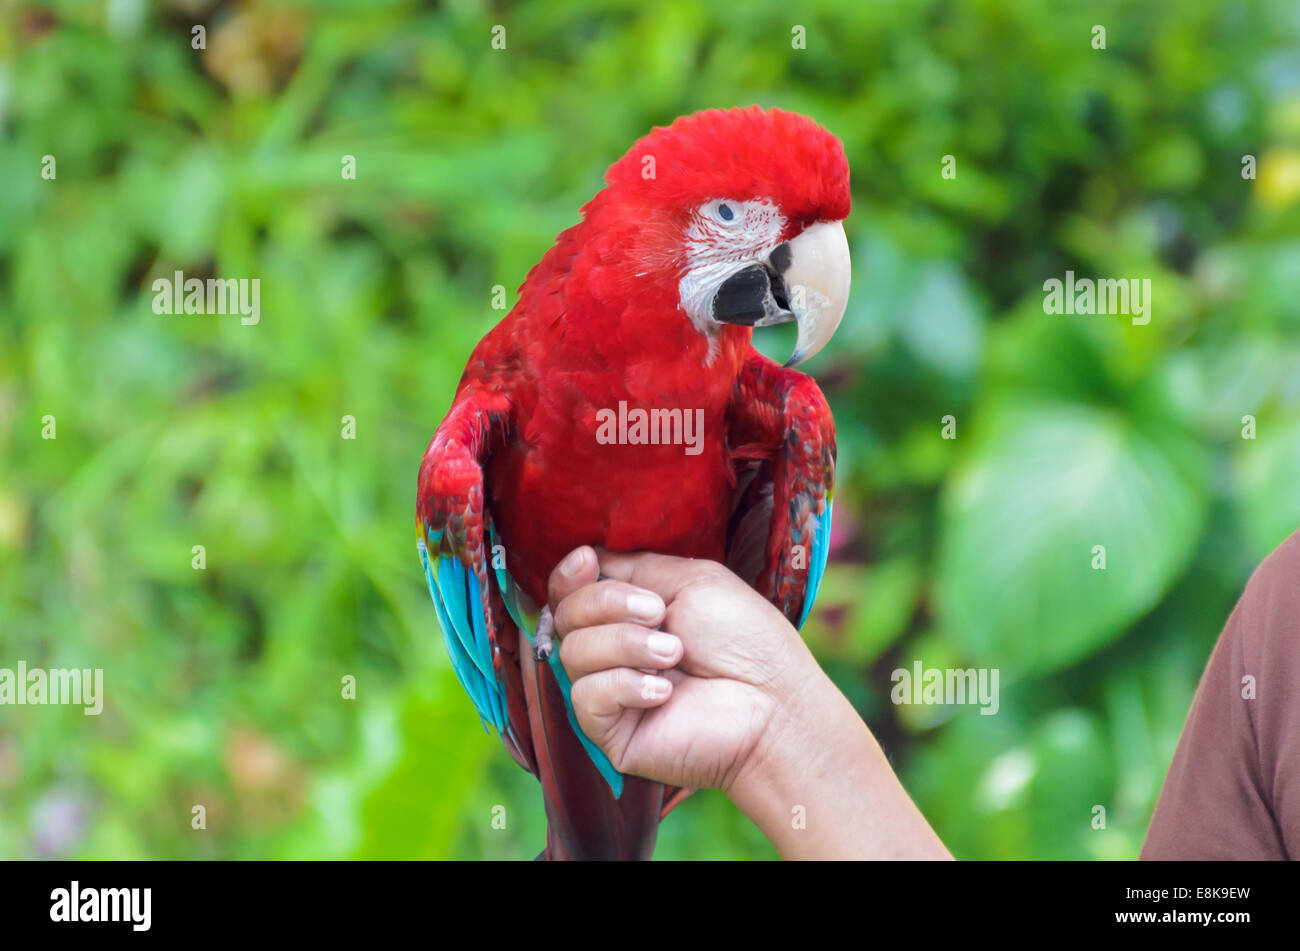 Green-Winged Macaw scientific name Ara chloroptera perch on the hand Stock Photo